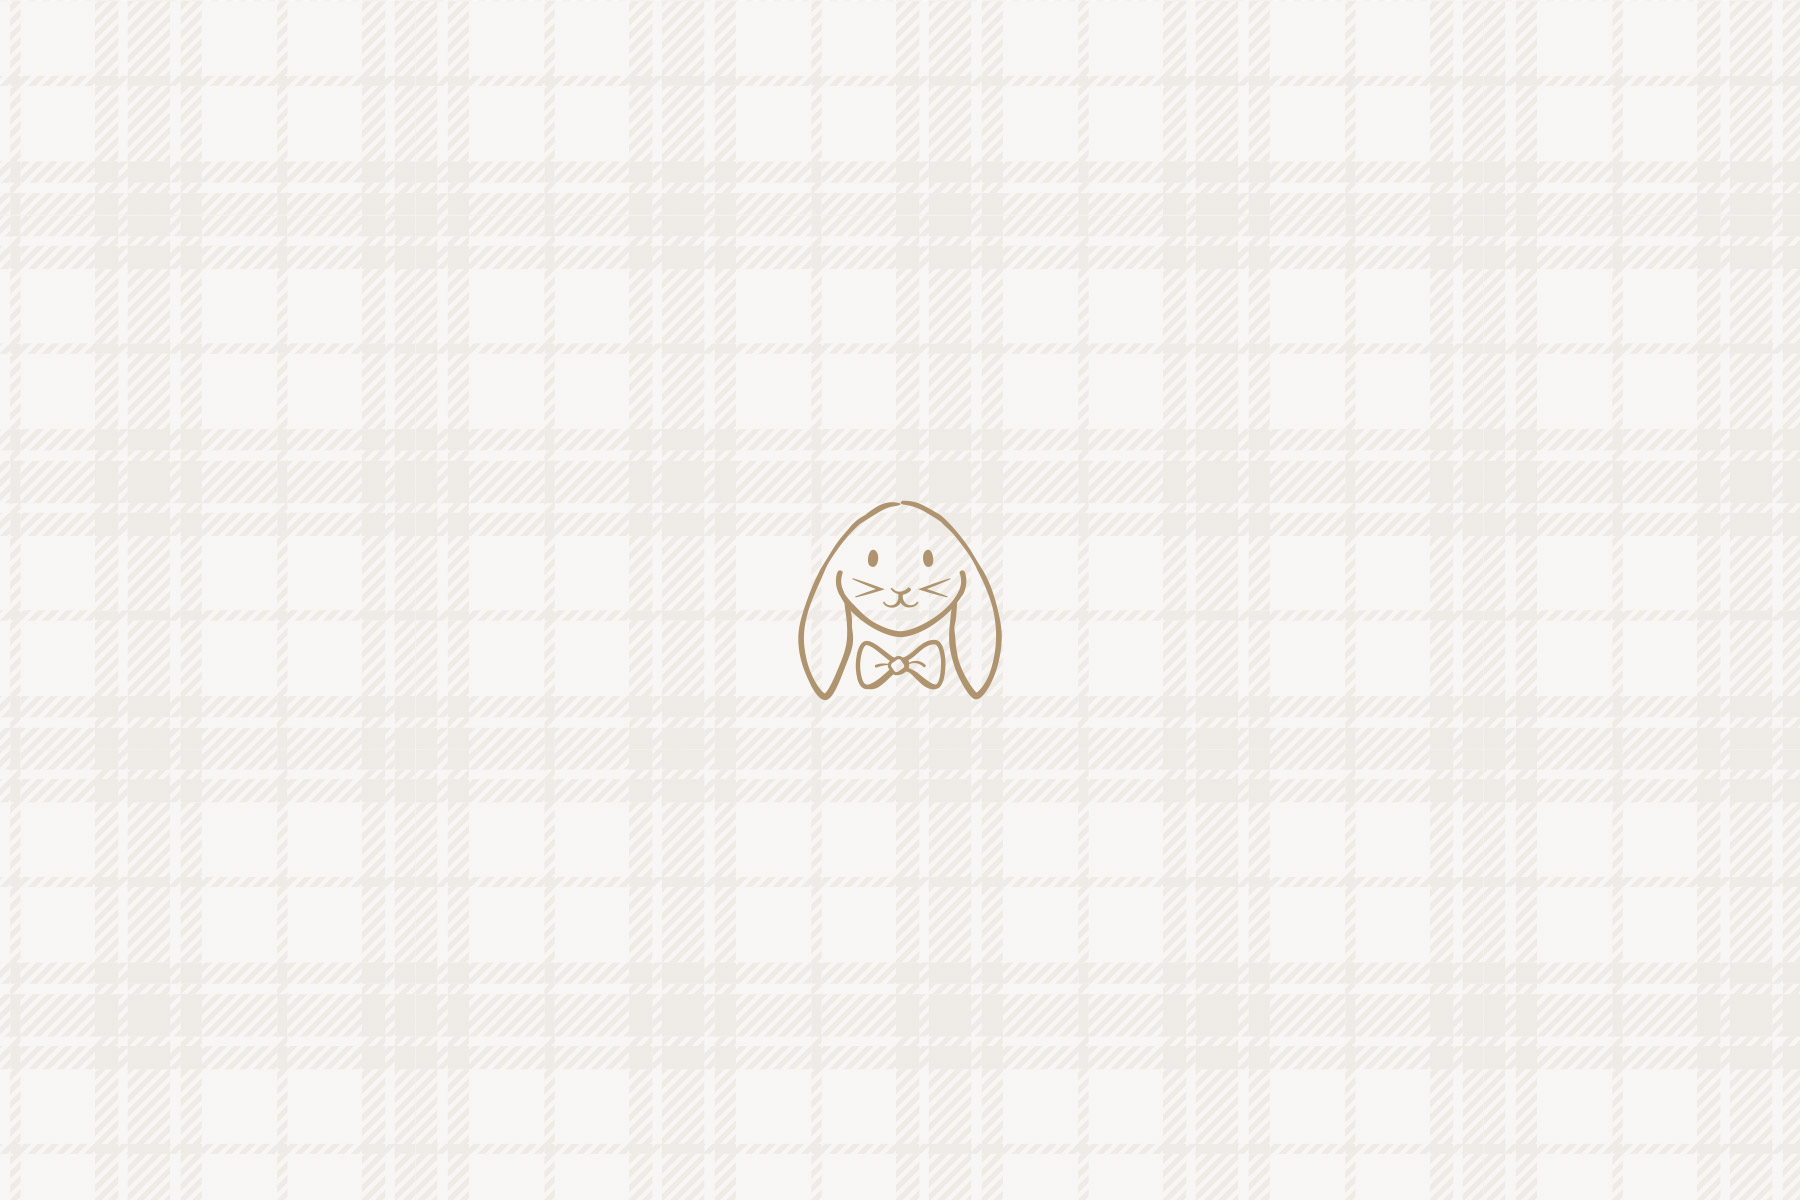 Outlined bunny head illustration on a plaid background